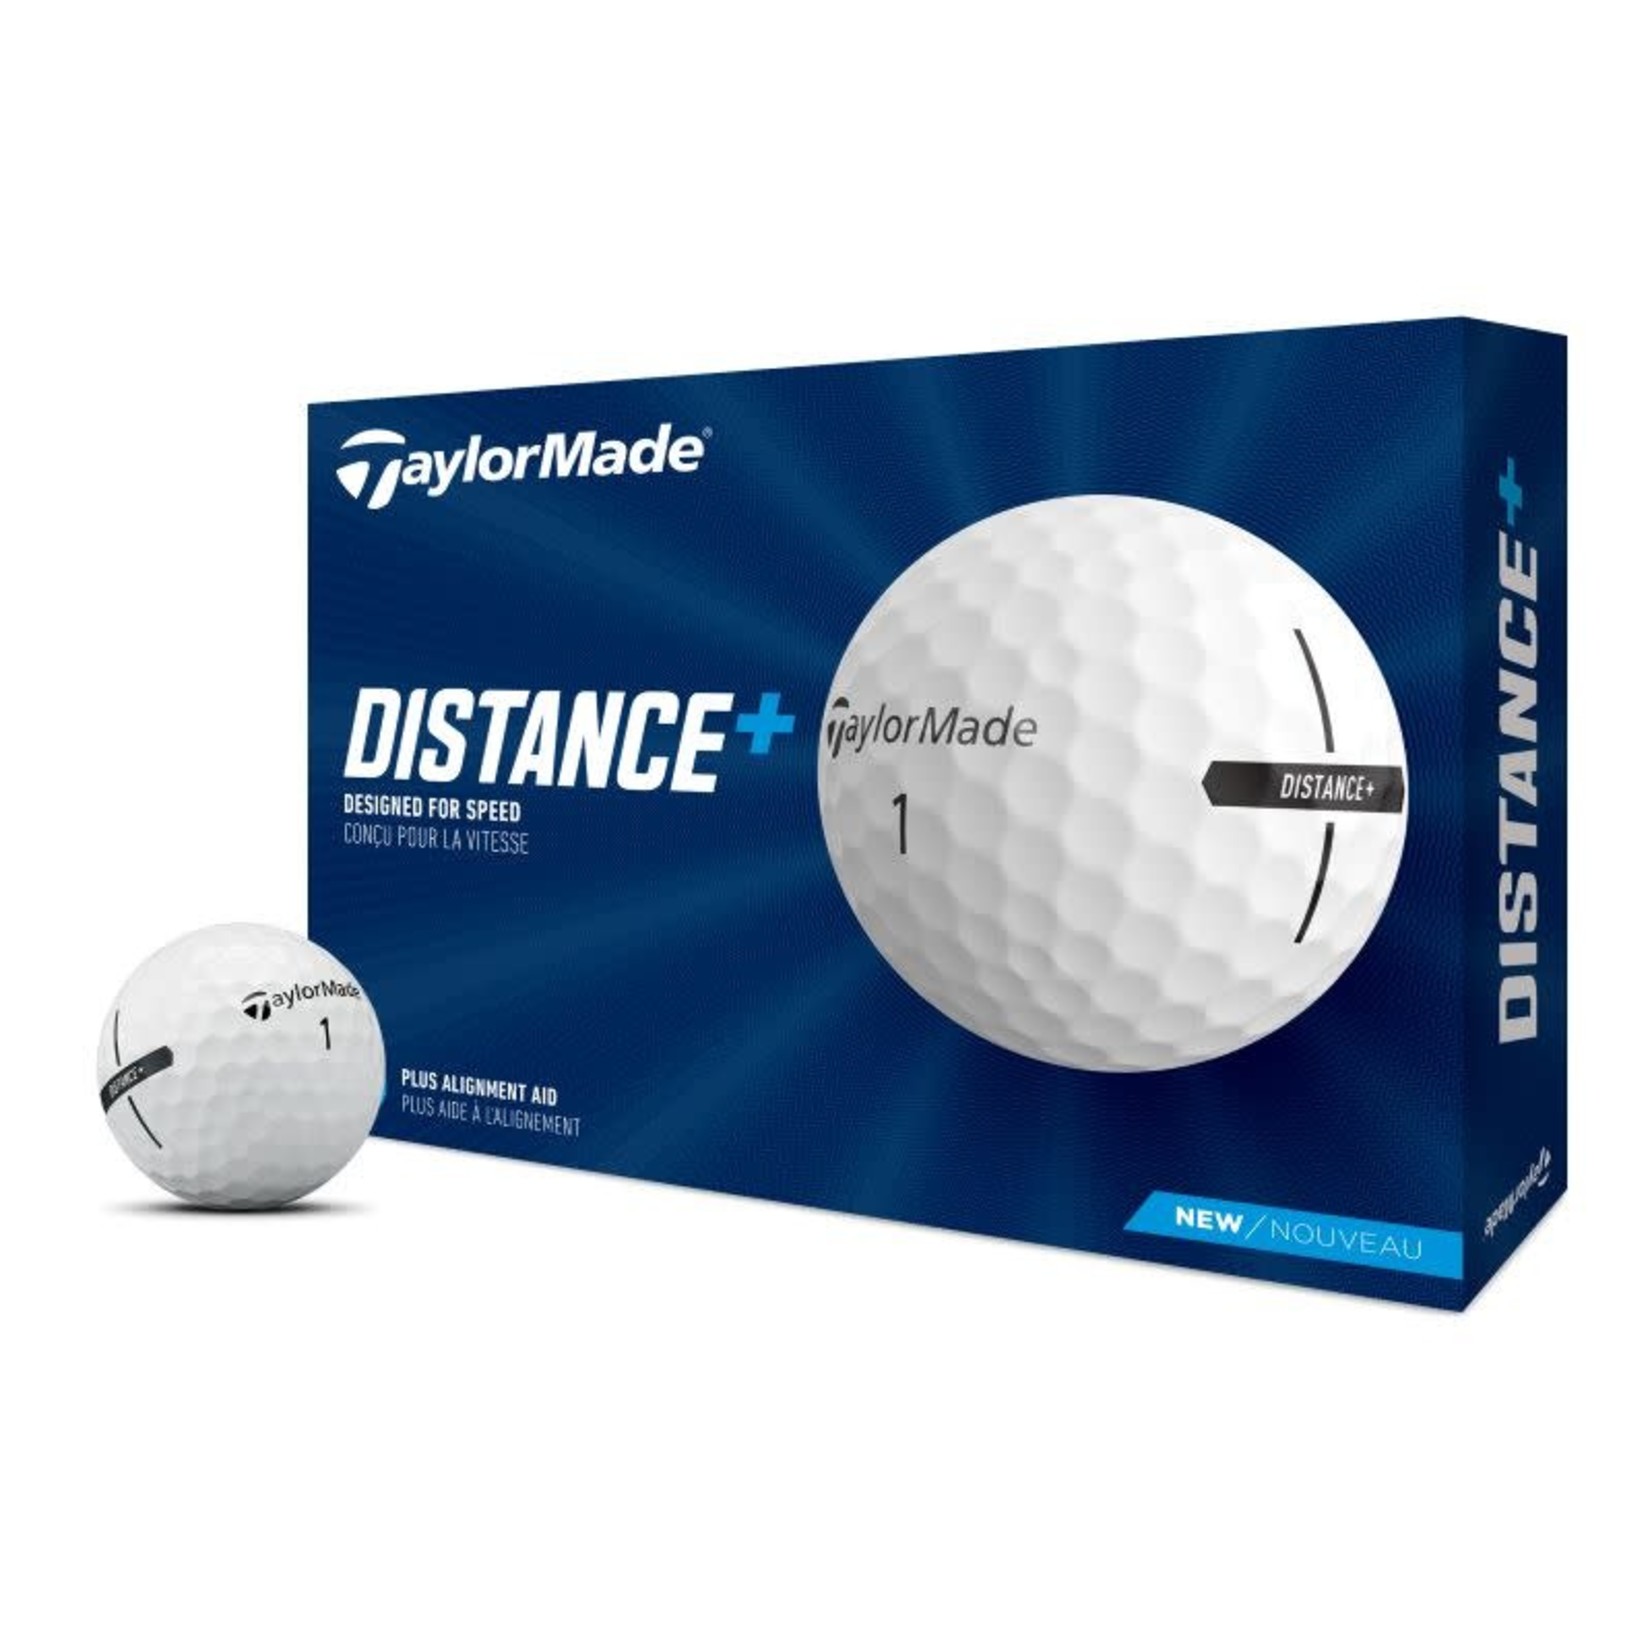 Taylor Made TaylorMade Distance + White